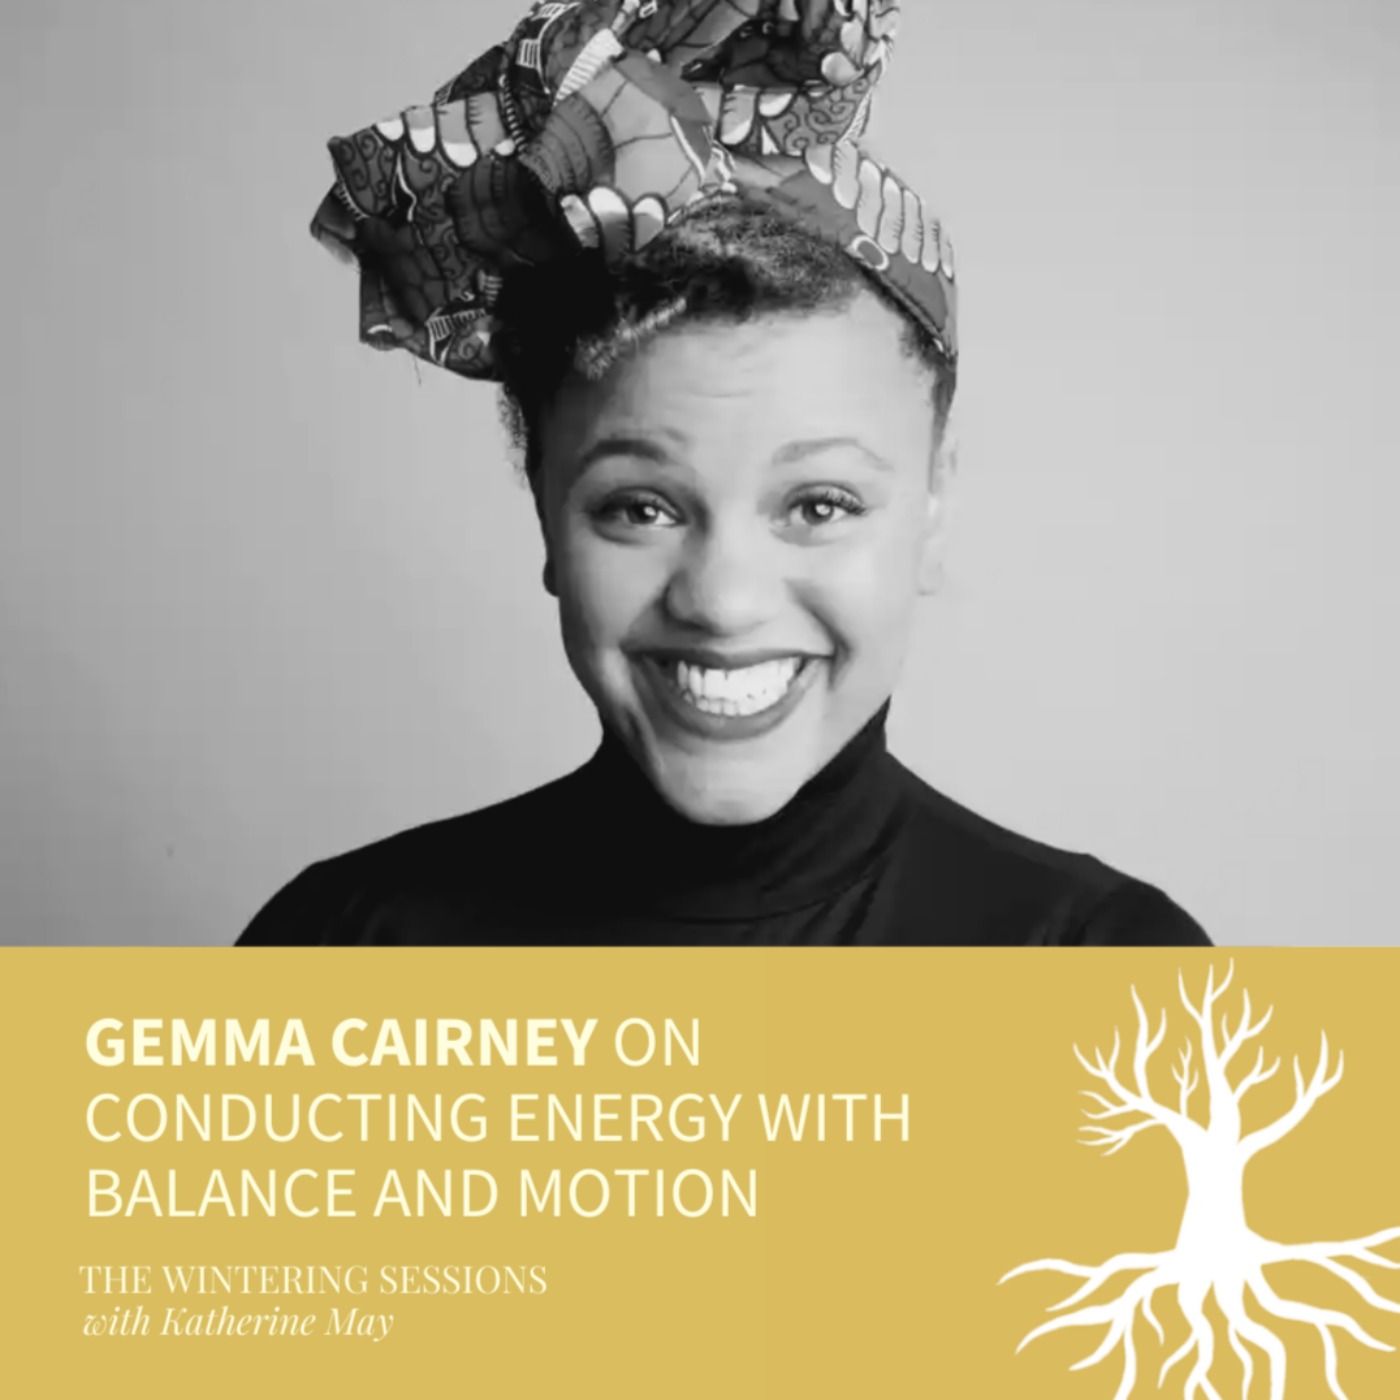 Gemma Cairney on conducting energy with balance and motion